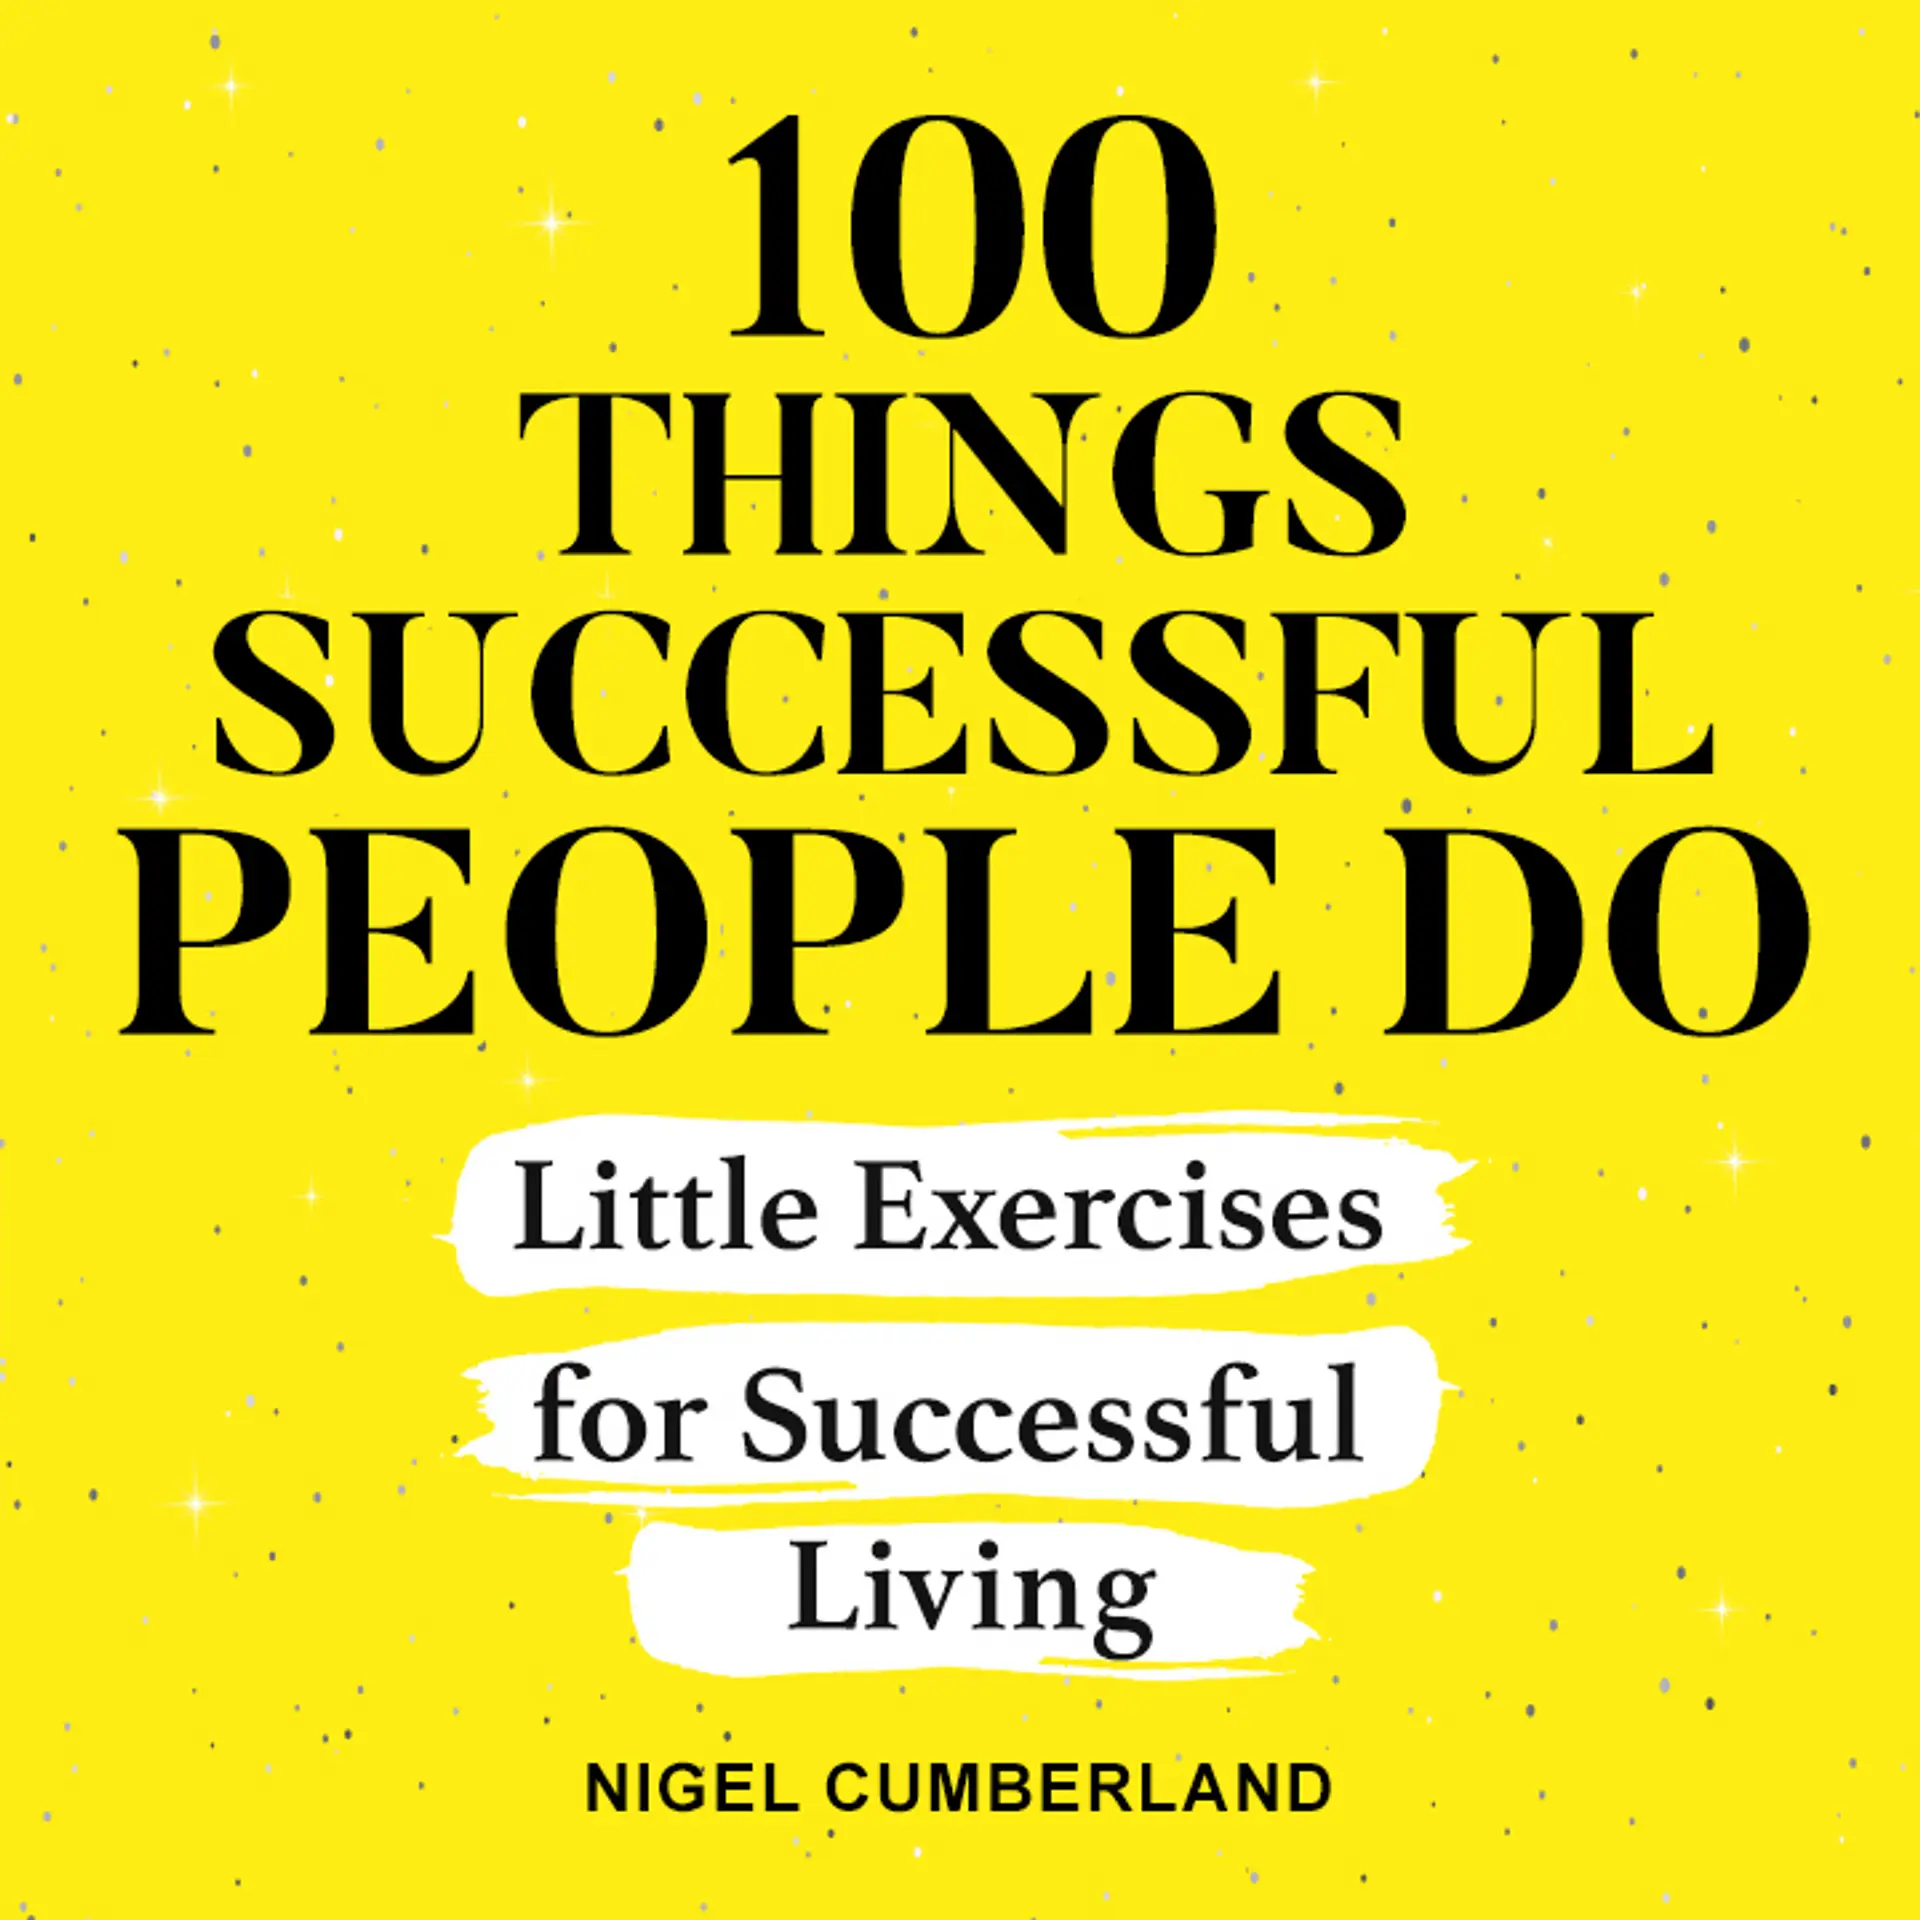 100 Things Successful People DO | 